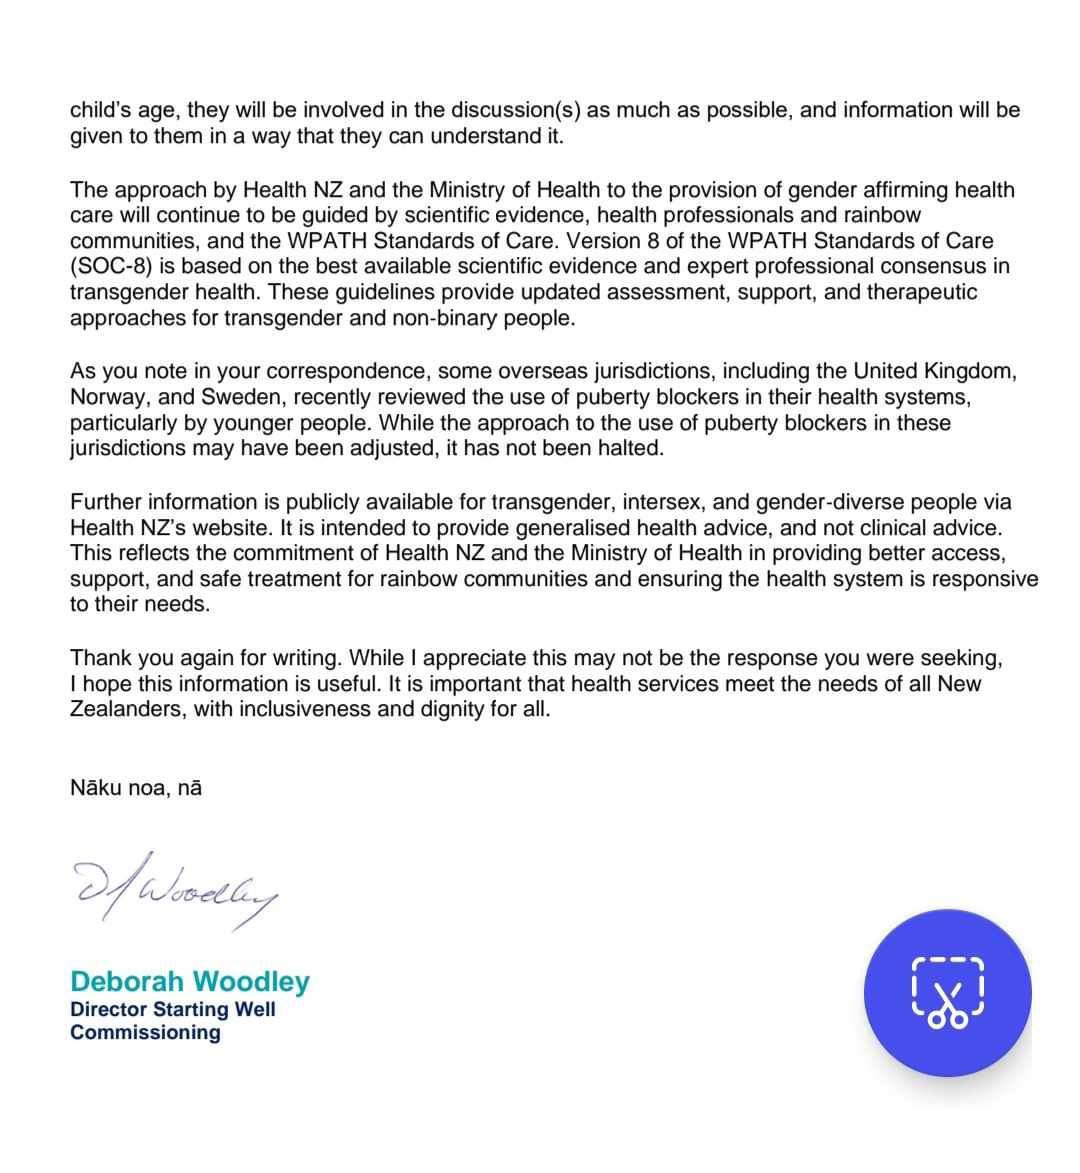 Oh, wow - hang on tight to your kids if you’re in NZ! A letter received by a concerned parent from Health NZ confirms they are going to keep following WPATH guidelines, and - to paraphrase - take advice from TQ lobby groups and those invested in maintaining the TQ status quo 😲